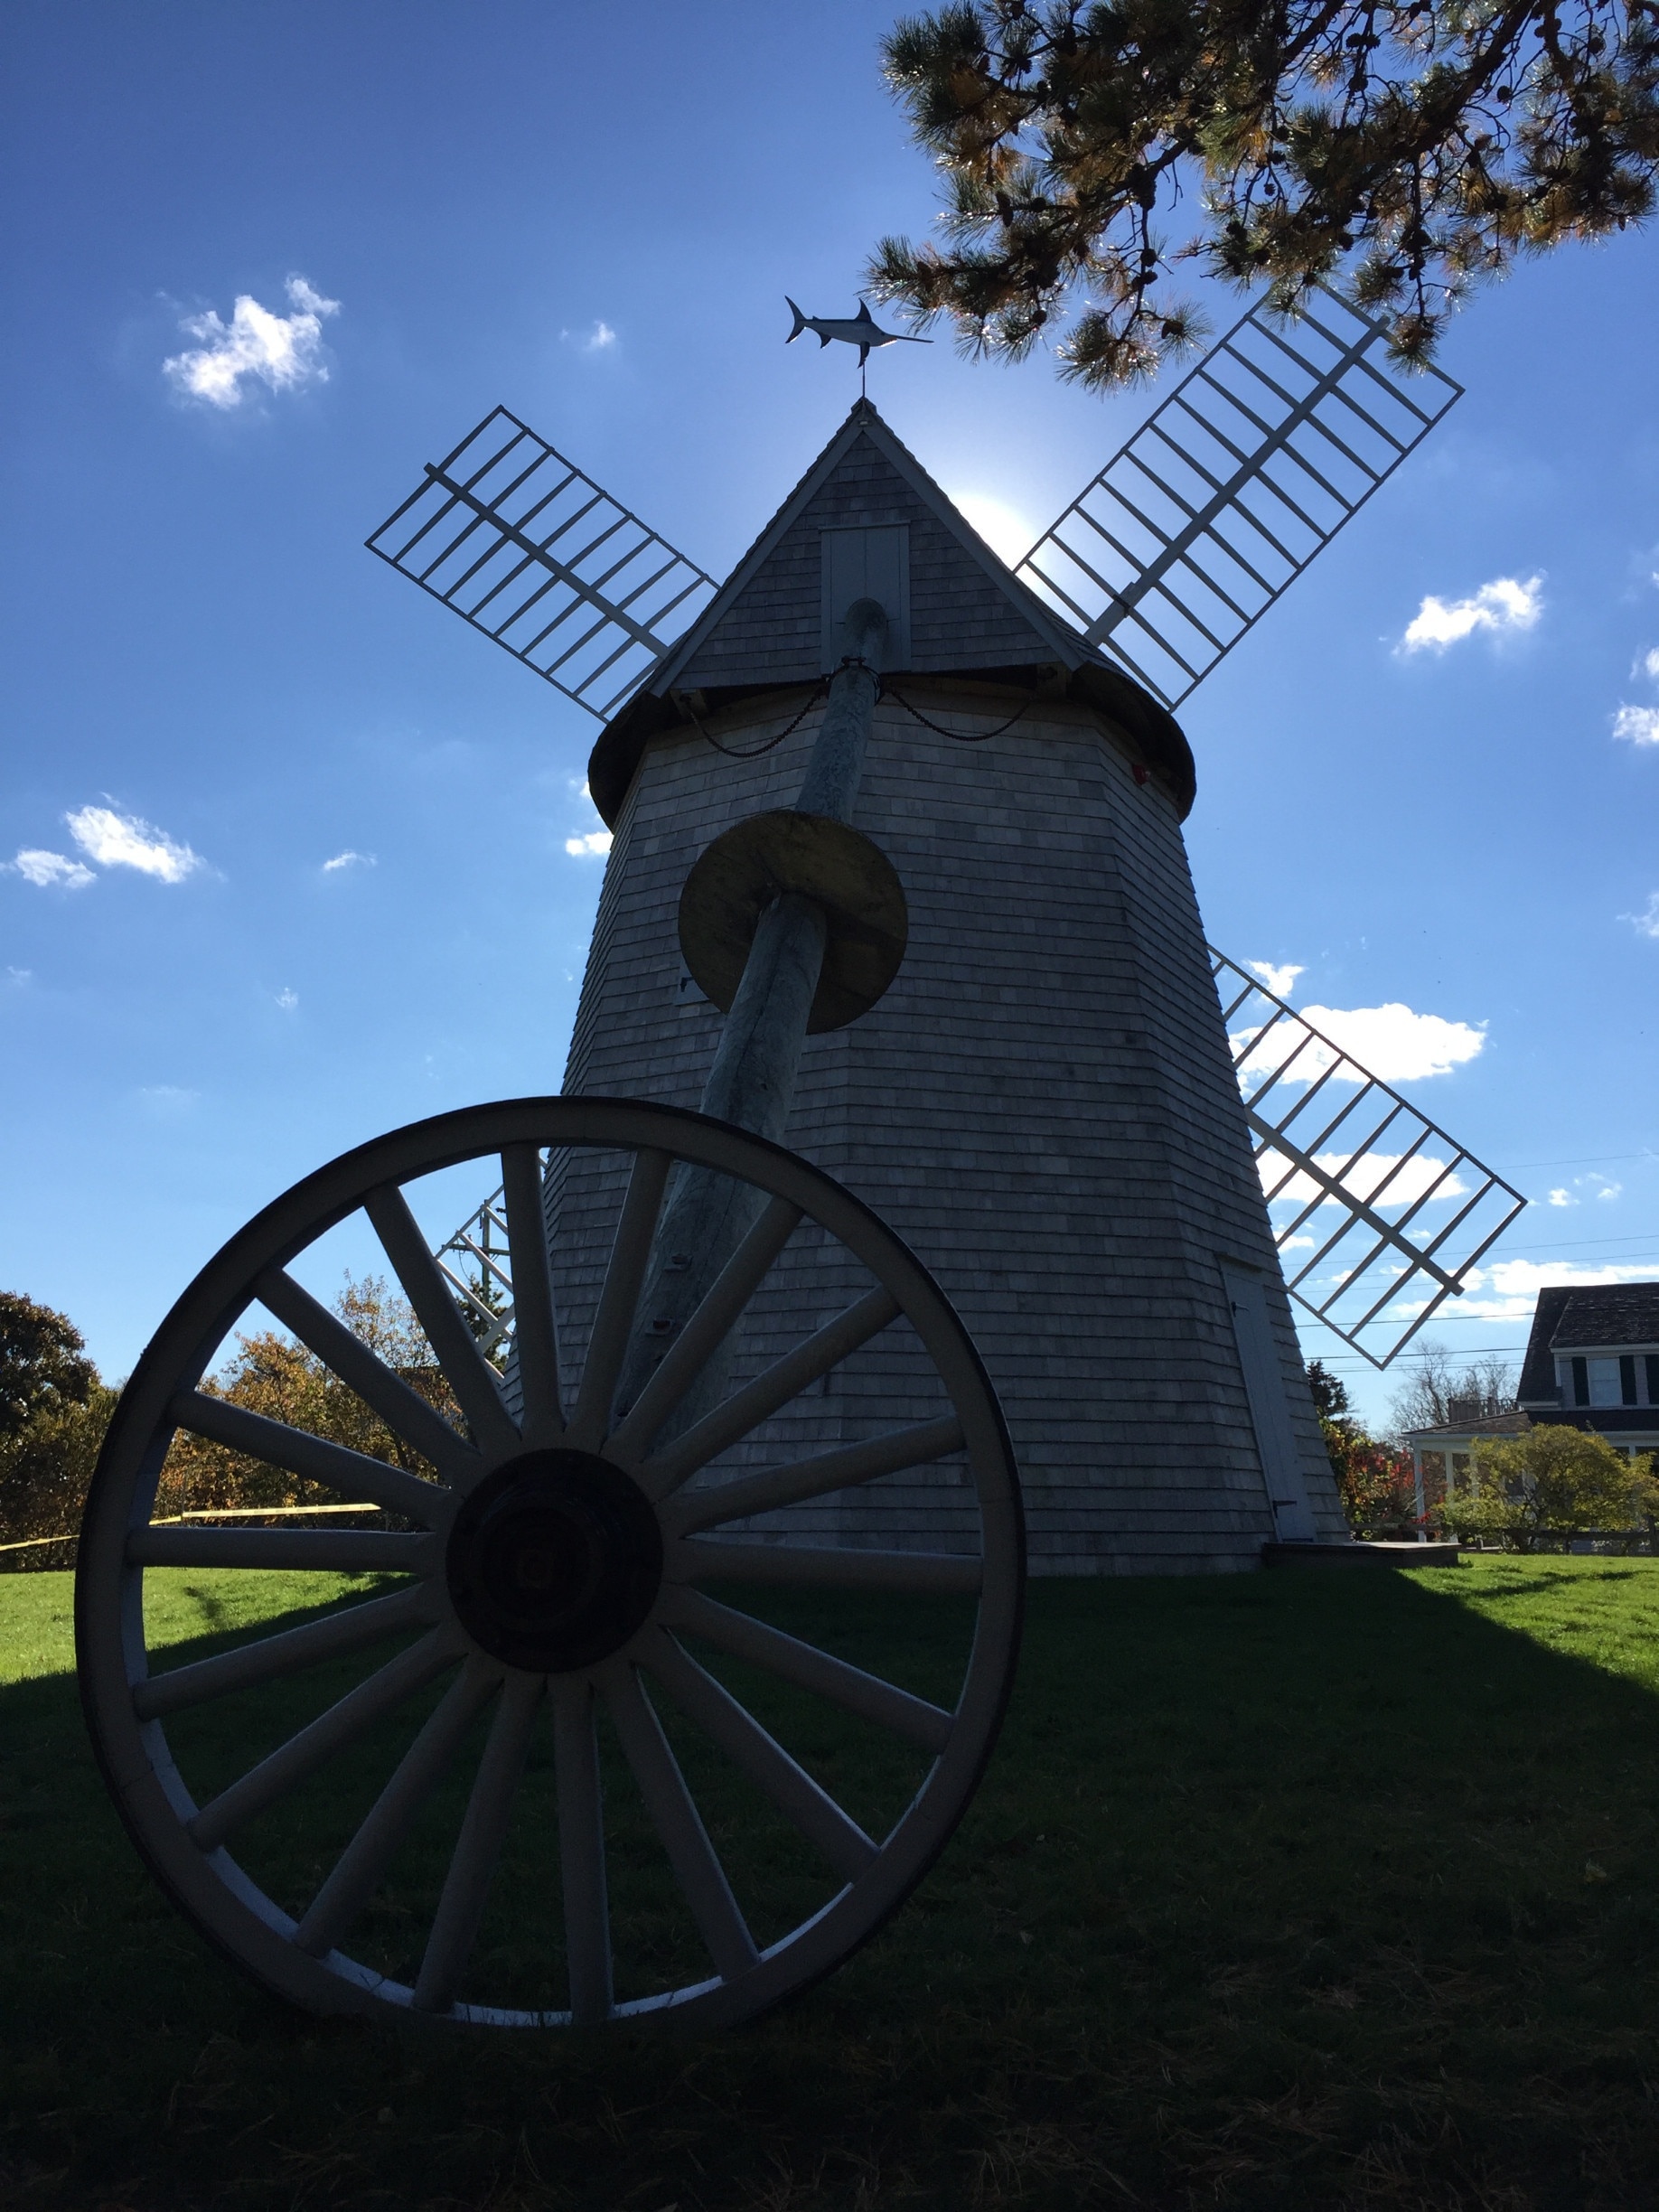 This windmill, The Godfrey Windmill, in Chase Park has none of its sheets mounted to the vanes.  The expression "three sheets to the wind" originated because a windmill with only three sheets deployed will not (operate) turn effectively.

There is a quiet area behind the windmill with a stone labyrinth.